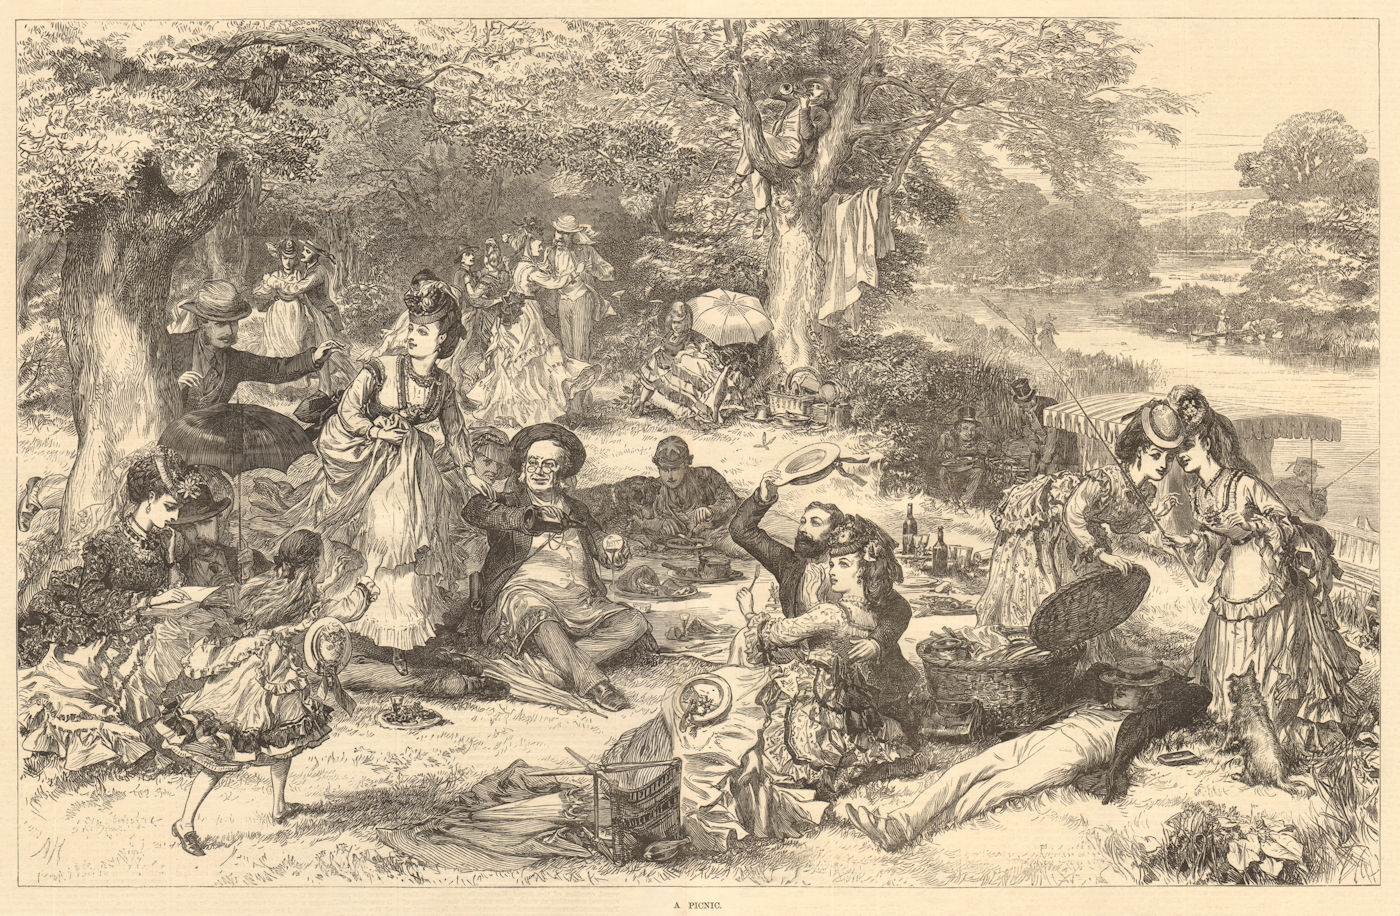 Associate Product A picnic. Society. Food. Children playing 1871 antique ILN full page print